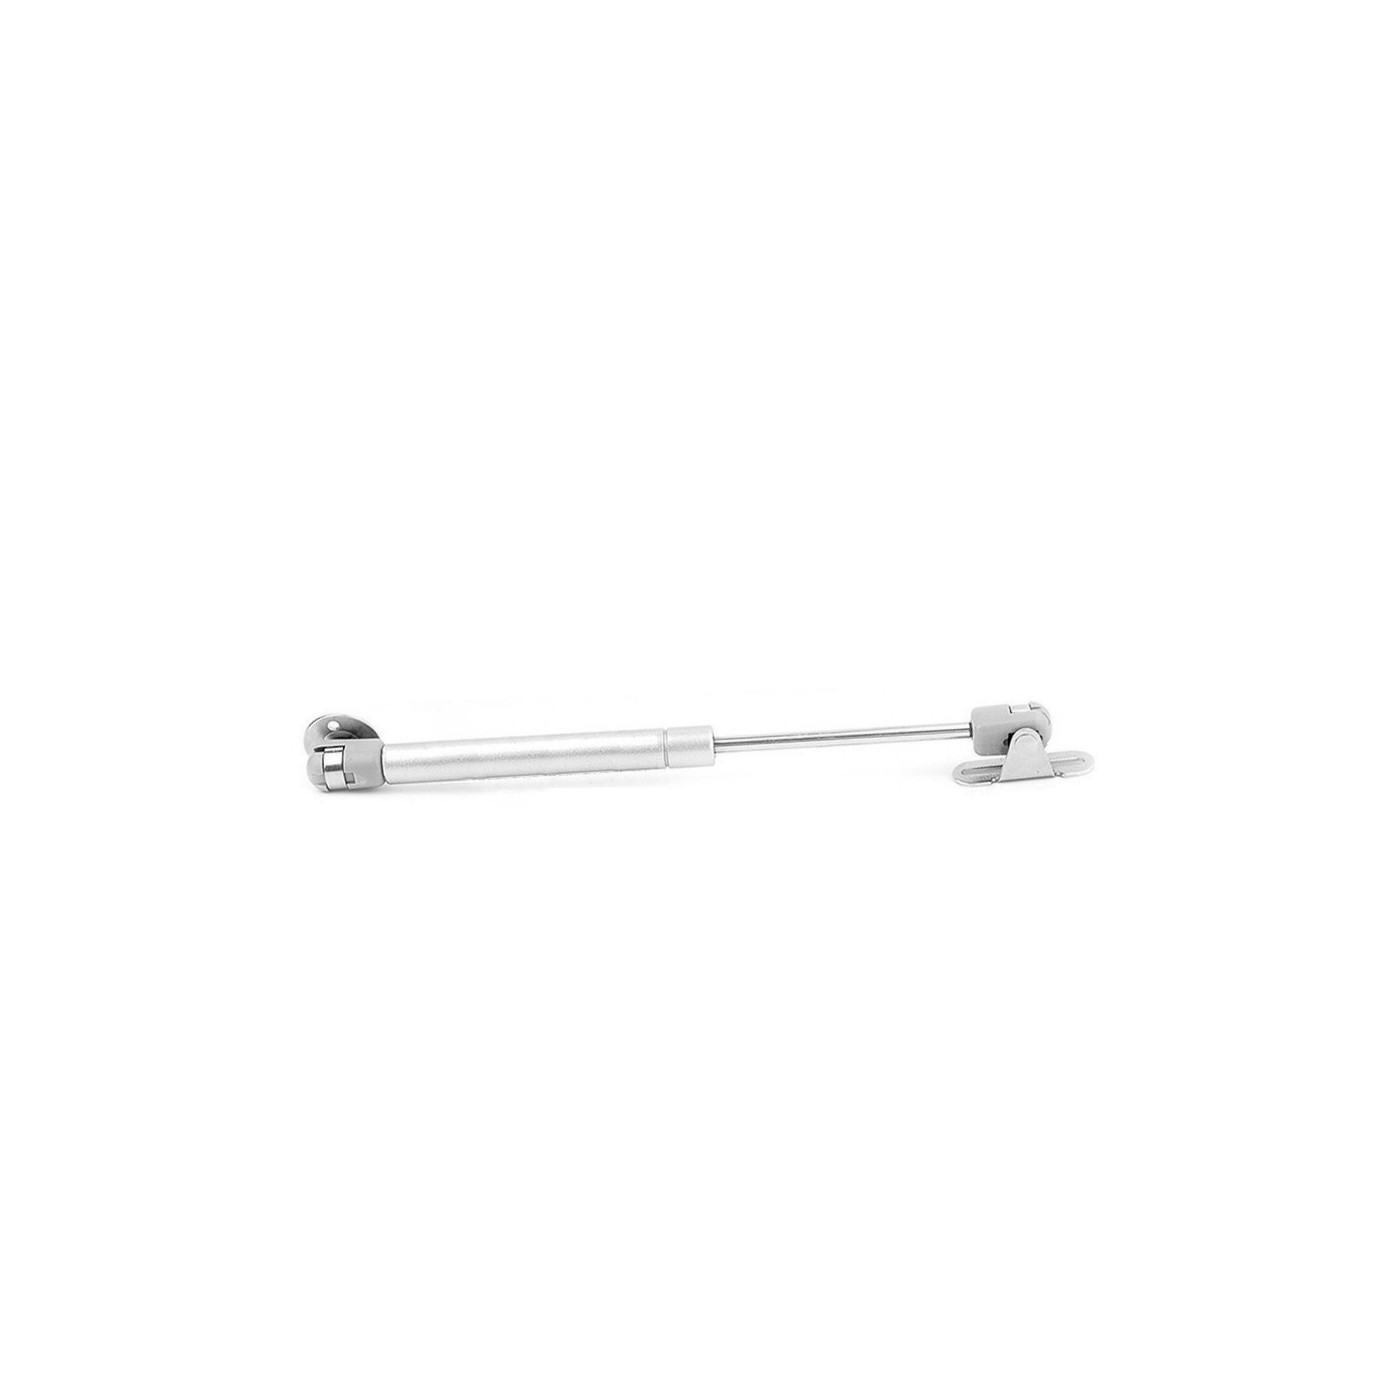 Universal gas spring with brackets (40N/4kg, 244 mm, silver)